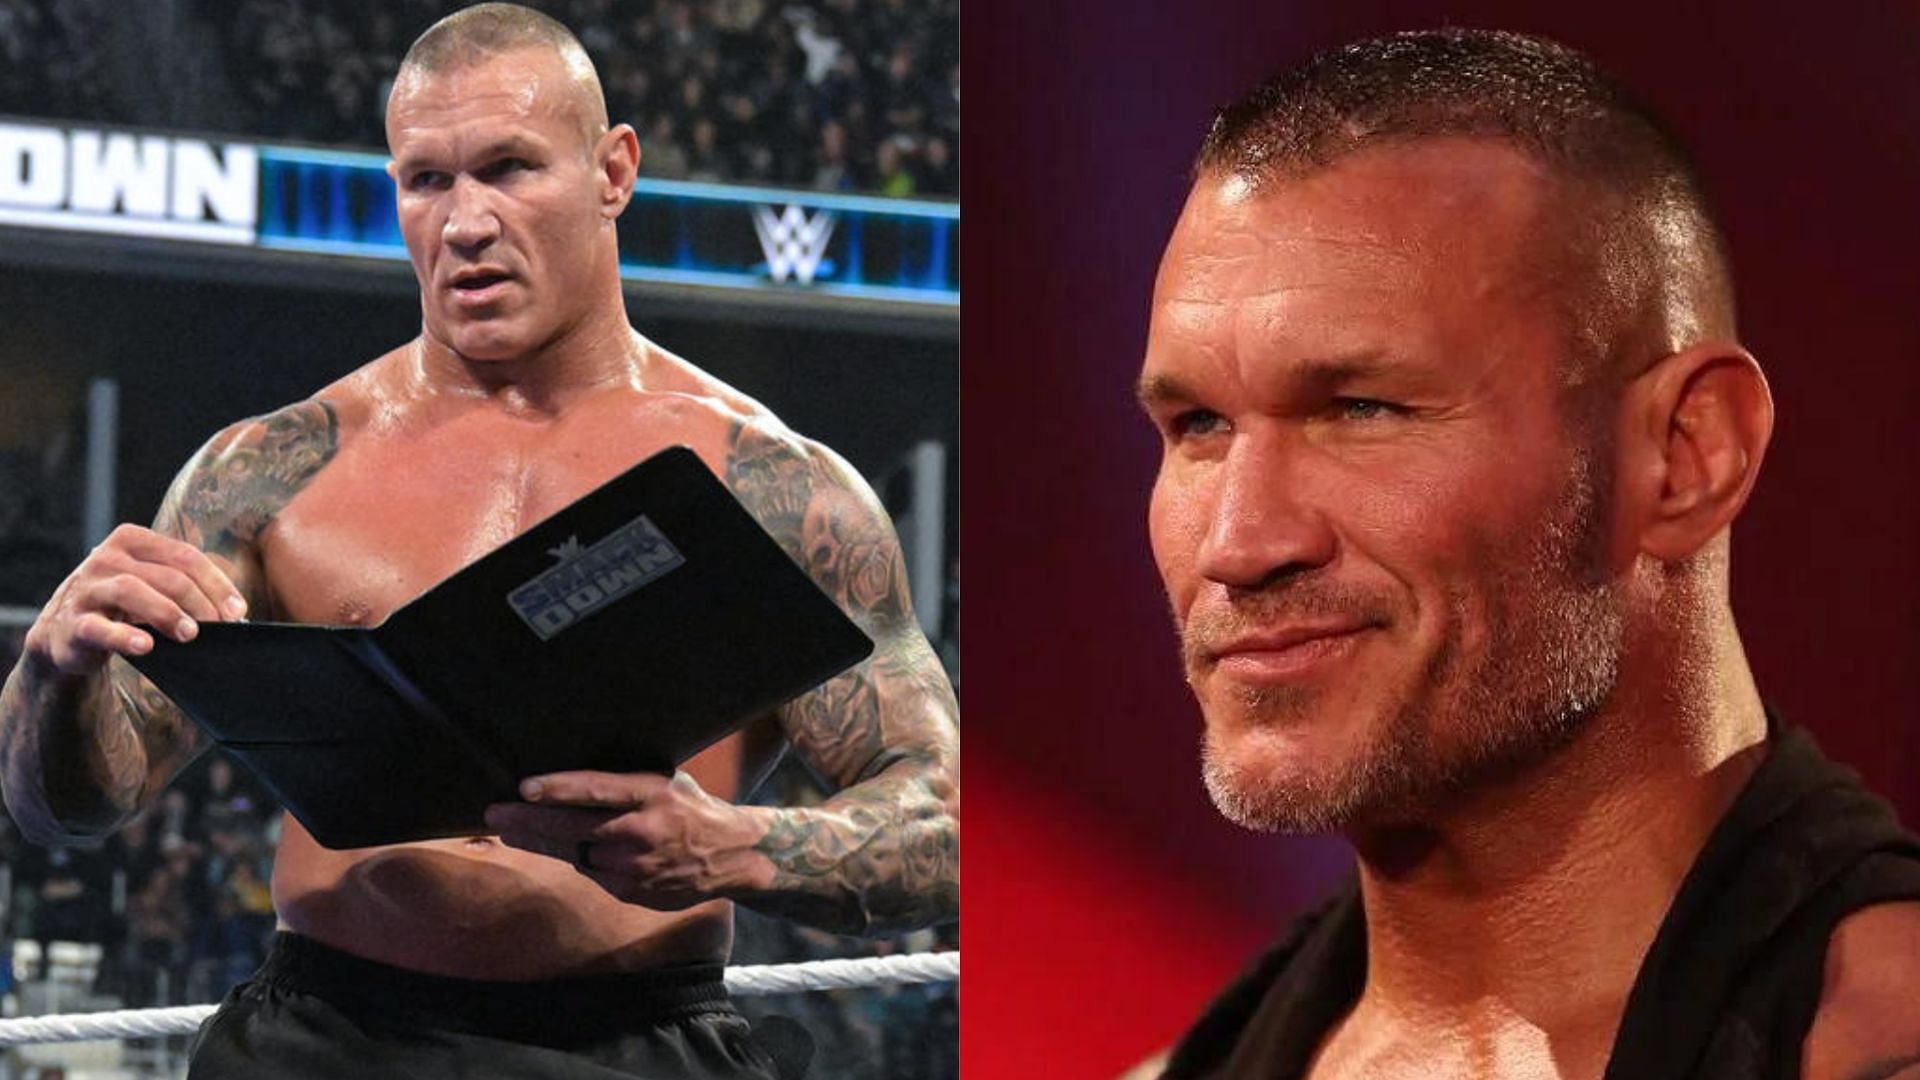 Orton is now officially on the SmackDown roster.